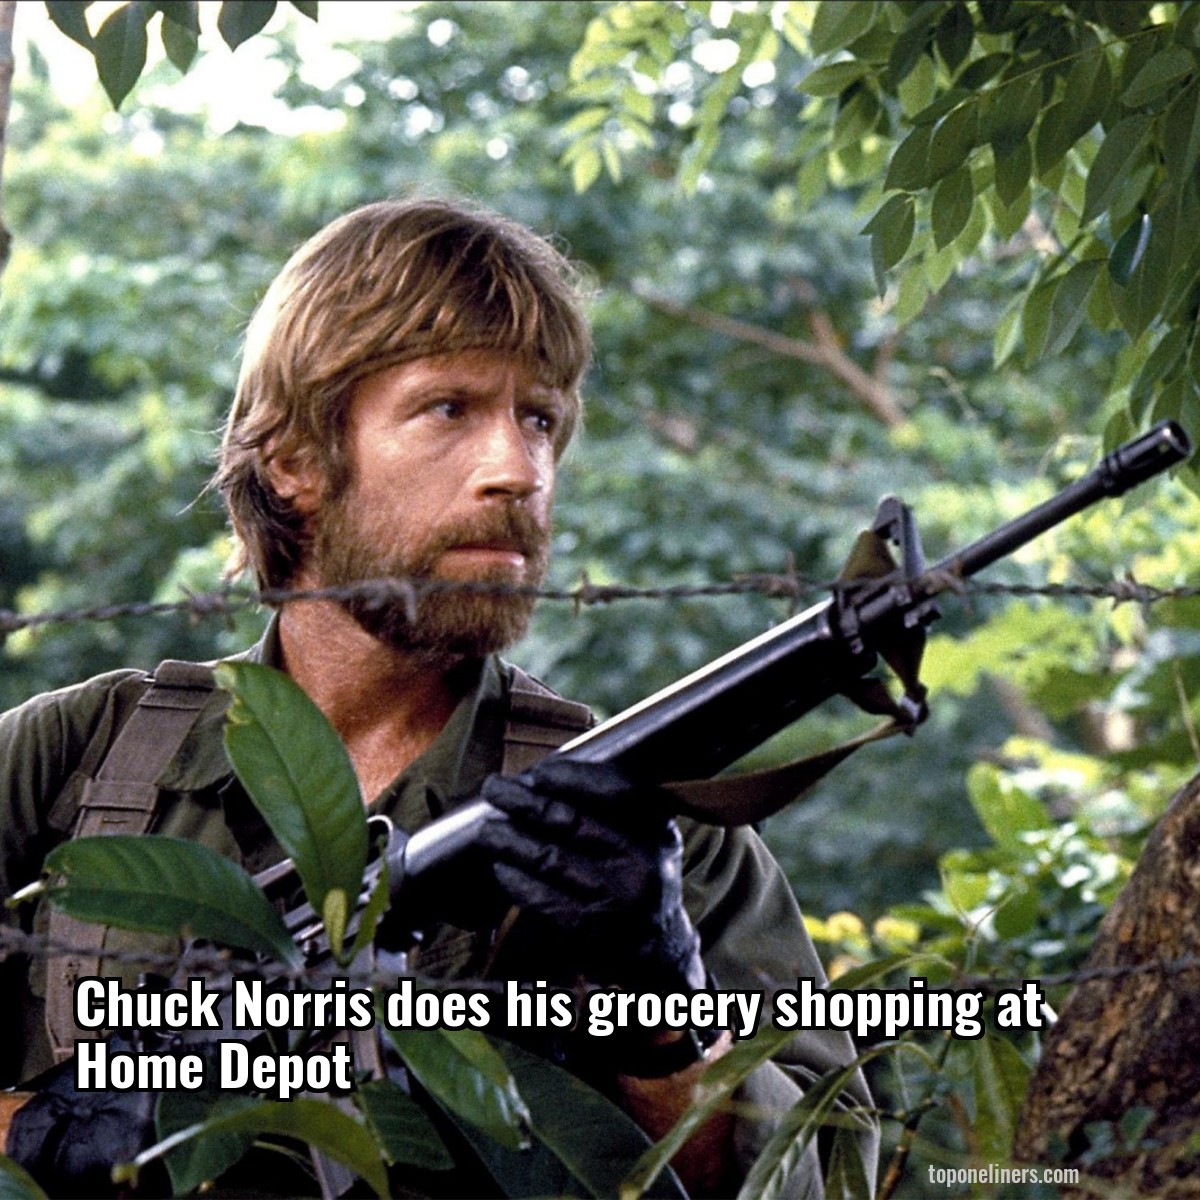 Chuck Norris does his grocery shopping at Home Depot